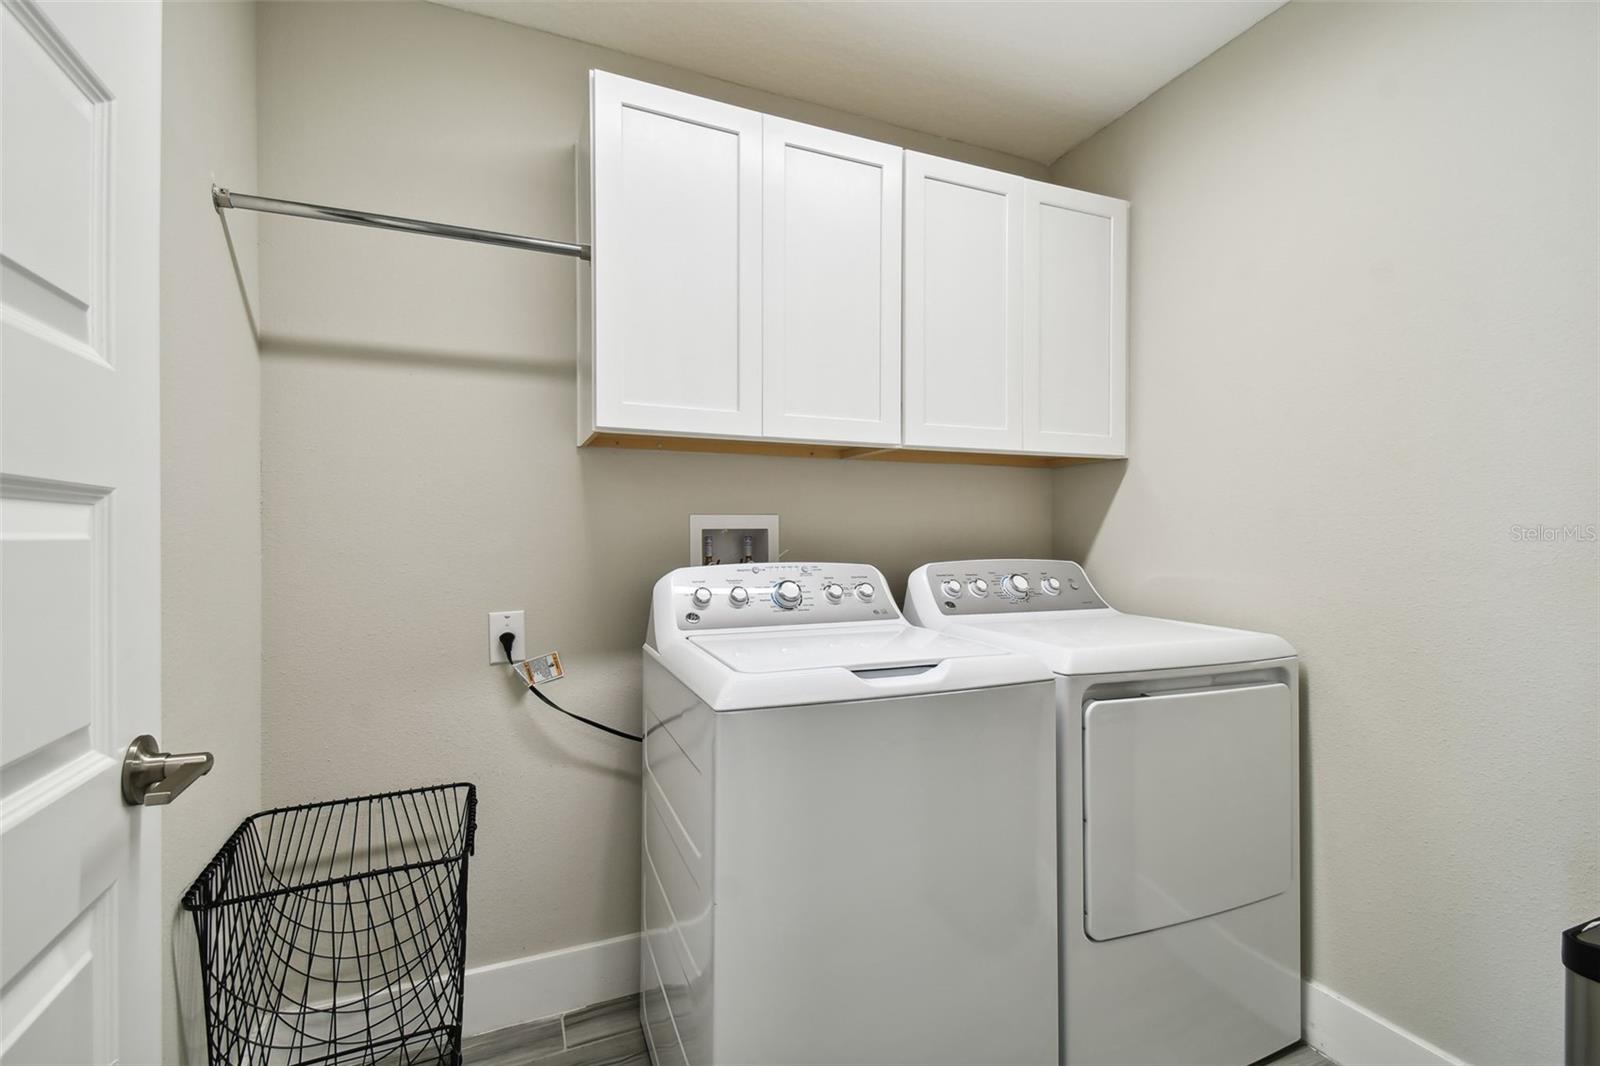 Laundry room with built-in cabinets and drying rack